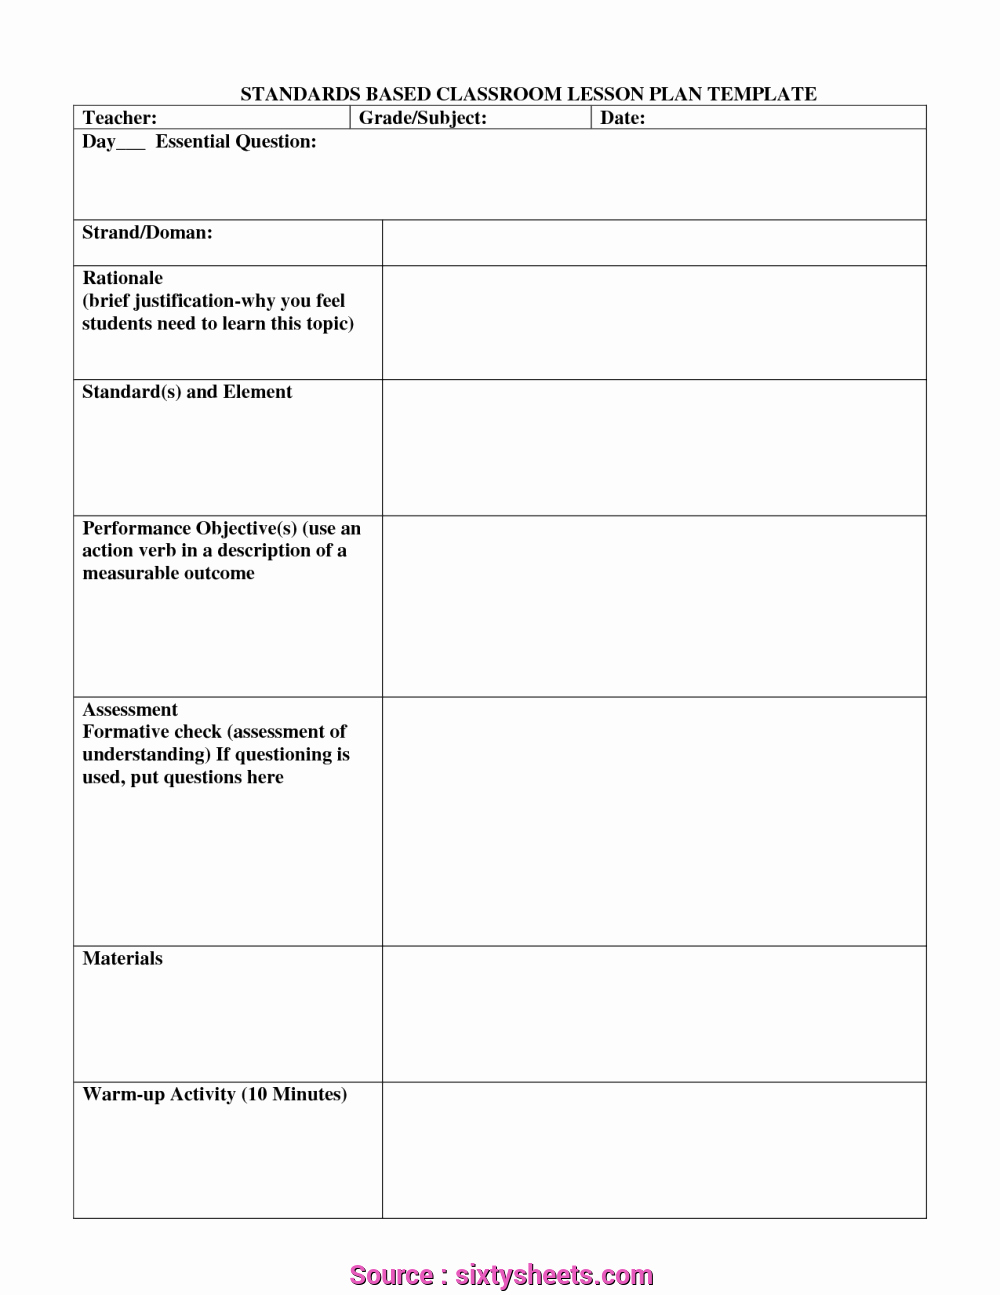 Standard Based Lesson Plan Template Luxury 4 Fantastic Printable Lesson Plan Template with Standards